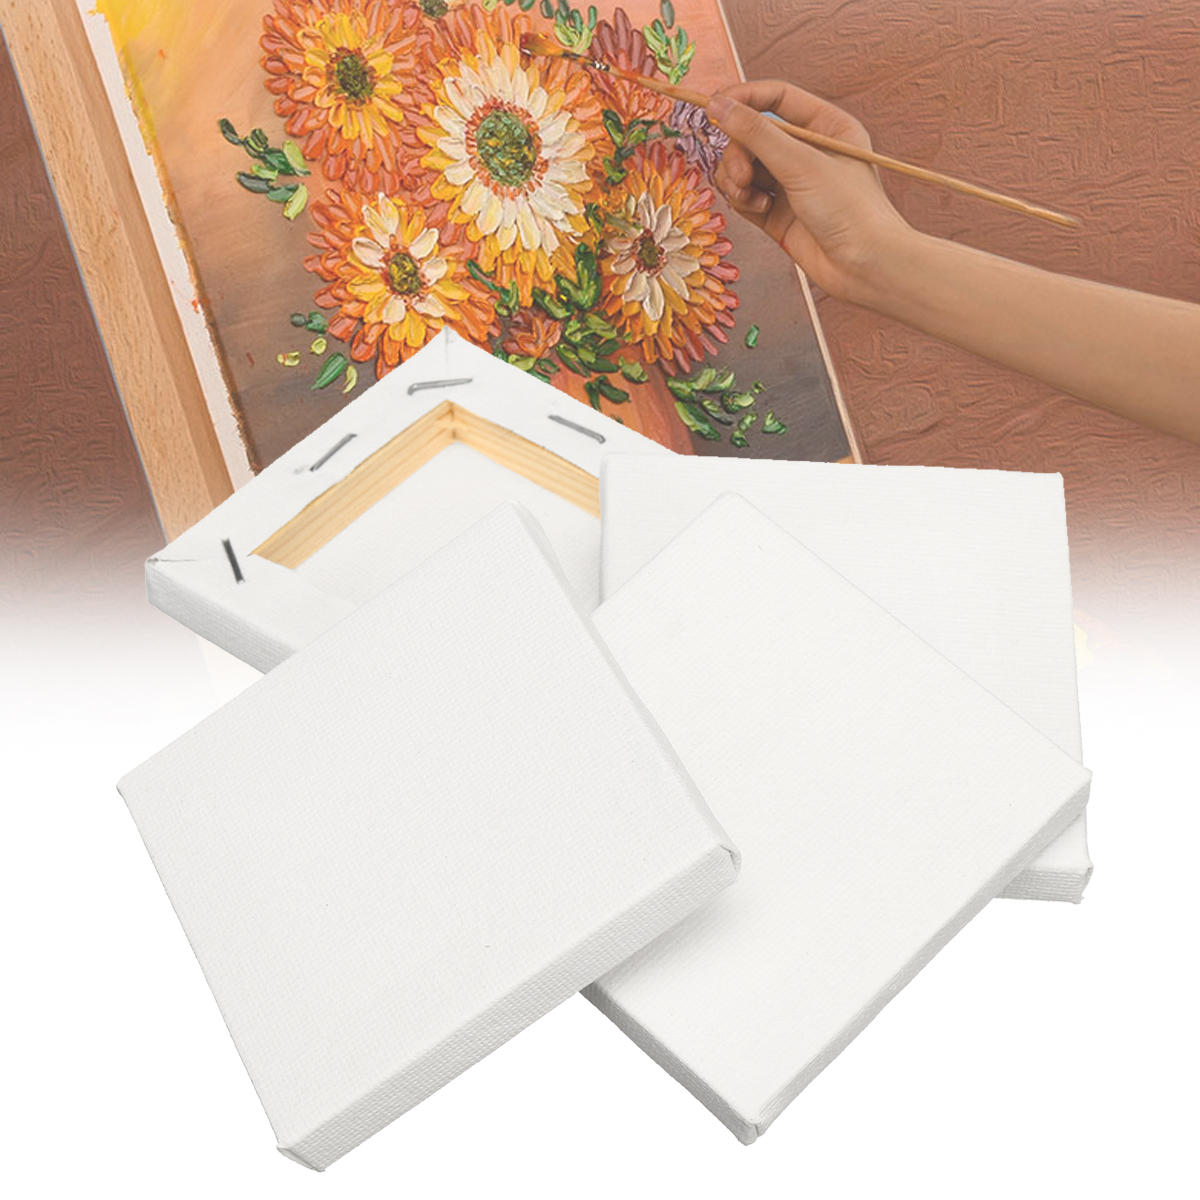 8PCS White Mini Blank Canvas Acrylic Paintings Frame Oil Paint Artist Square Art Sketch Boards Square Canvas